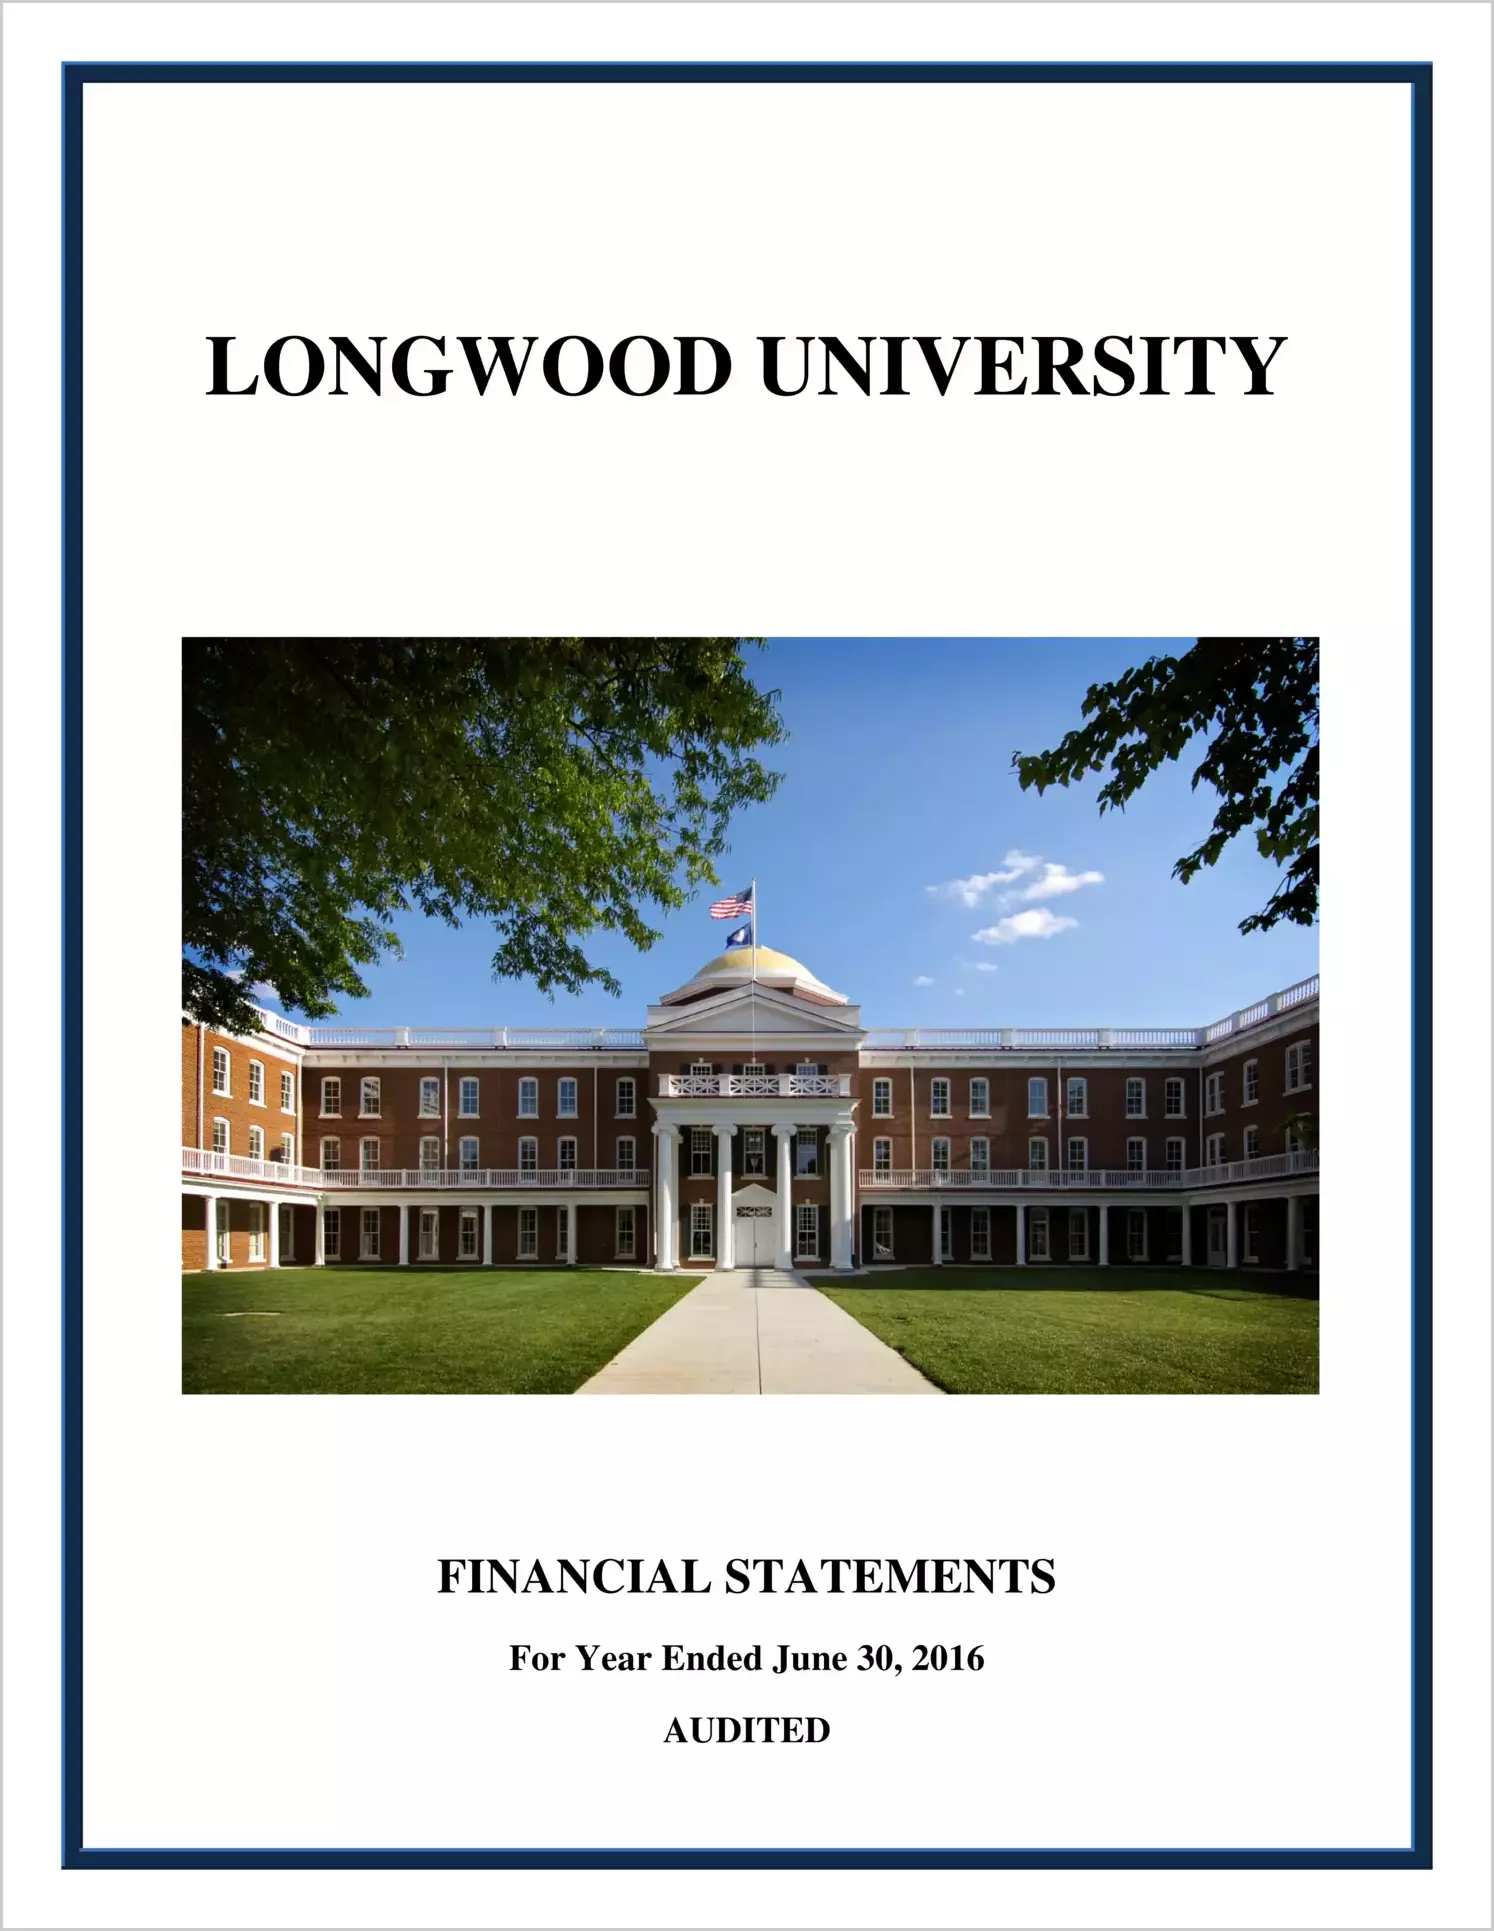 Longwood University Financial Statements for the year ended June 30, 2016